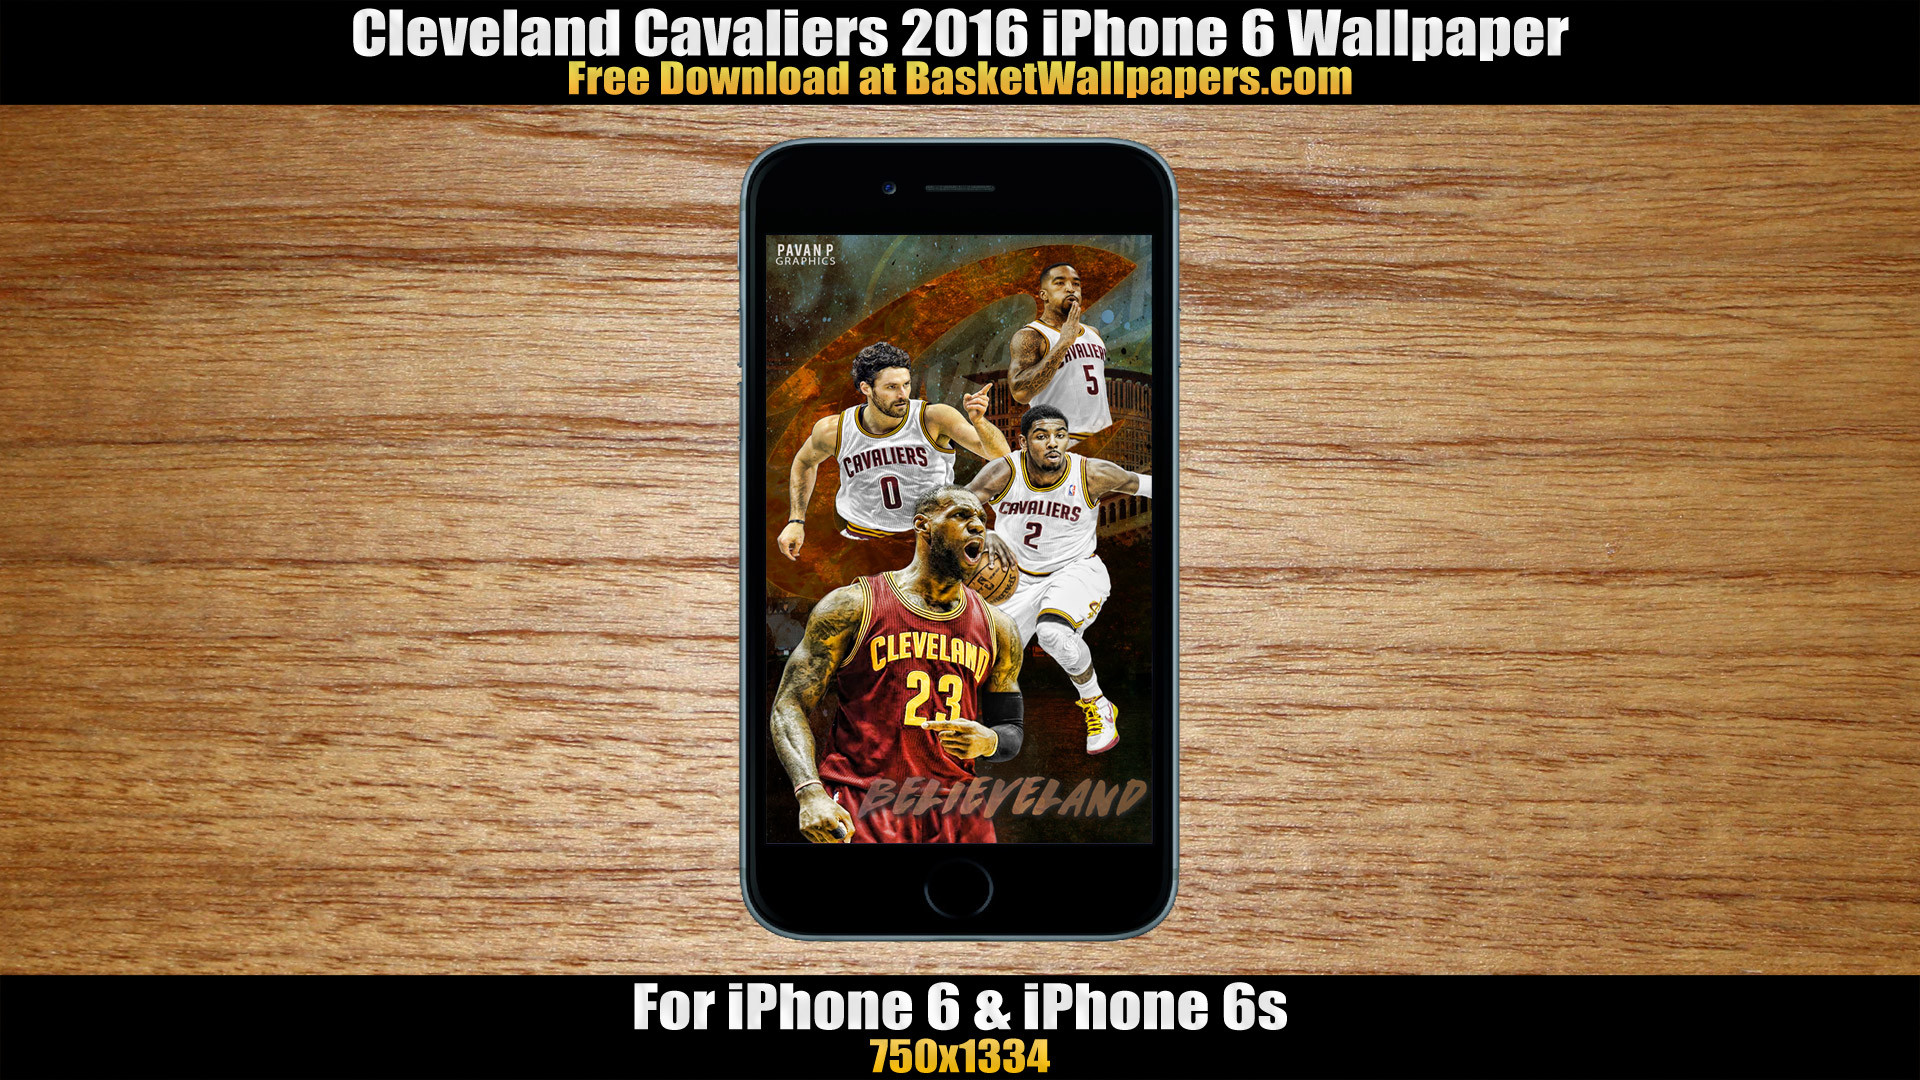 1920x1080 Cleveland Cavaliers 2016 iPhone 6 Wallpaper